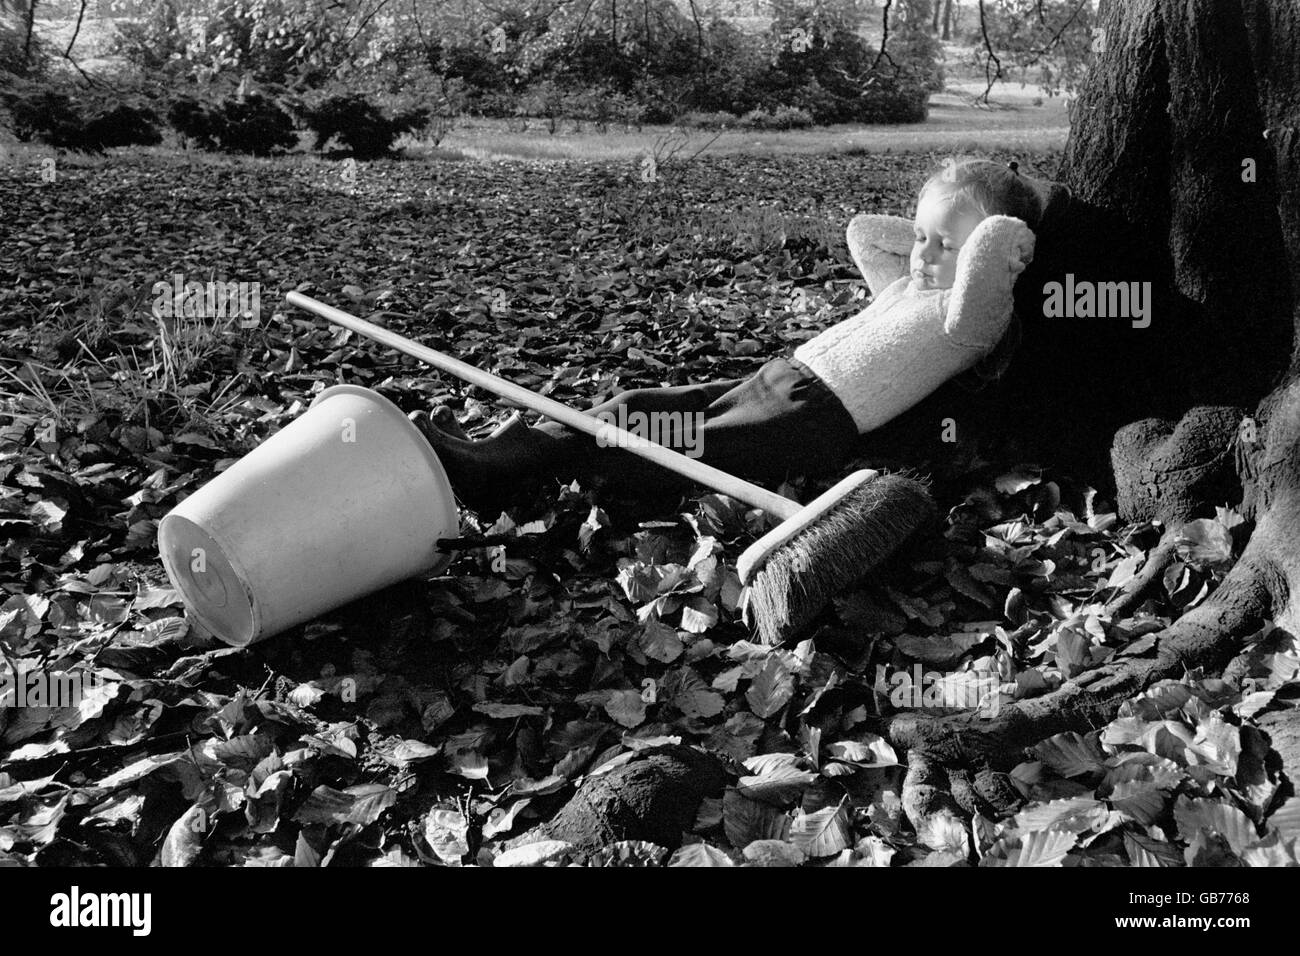 Three-year-old Erica Jane Shaw, taking a break after the exhausting autumnal task of sweeping up the leaves. Stock Photo